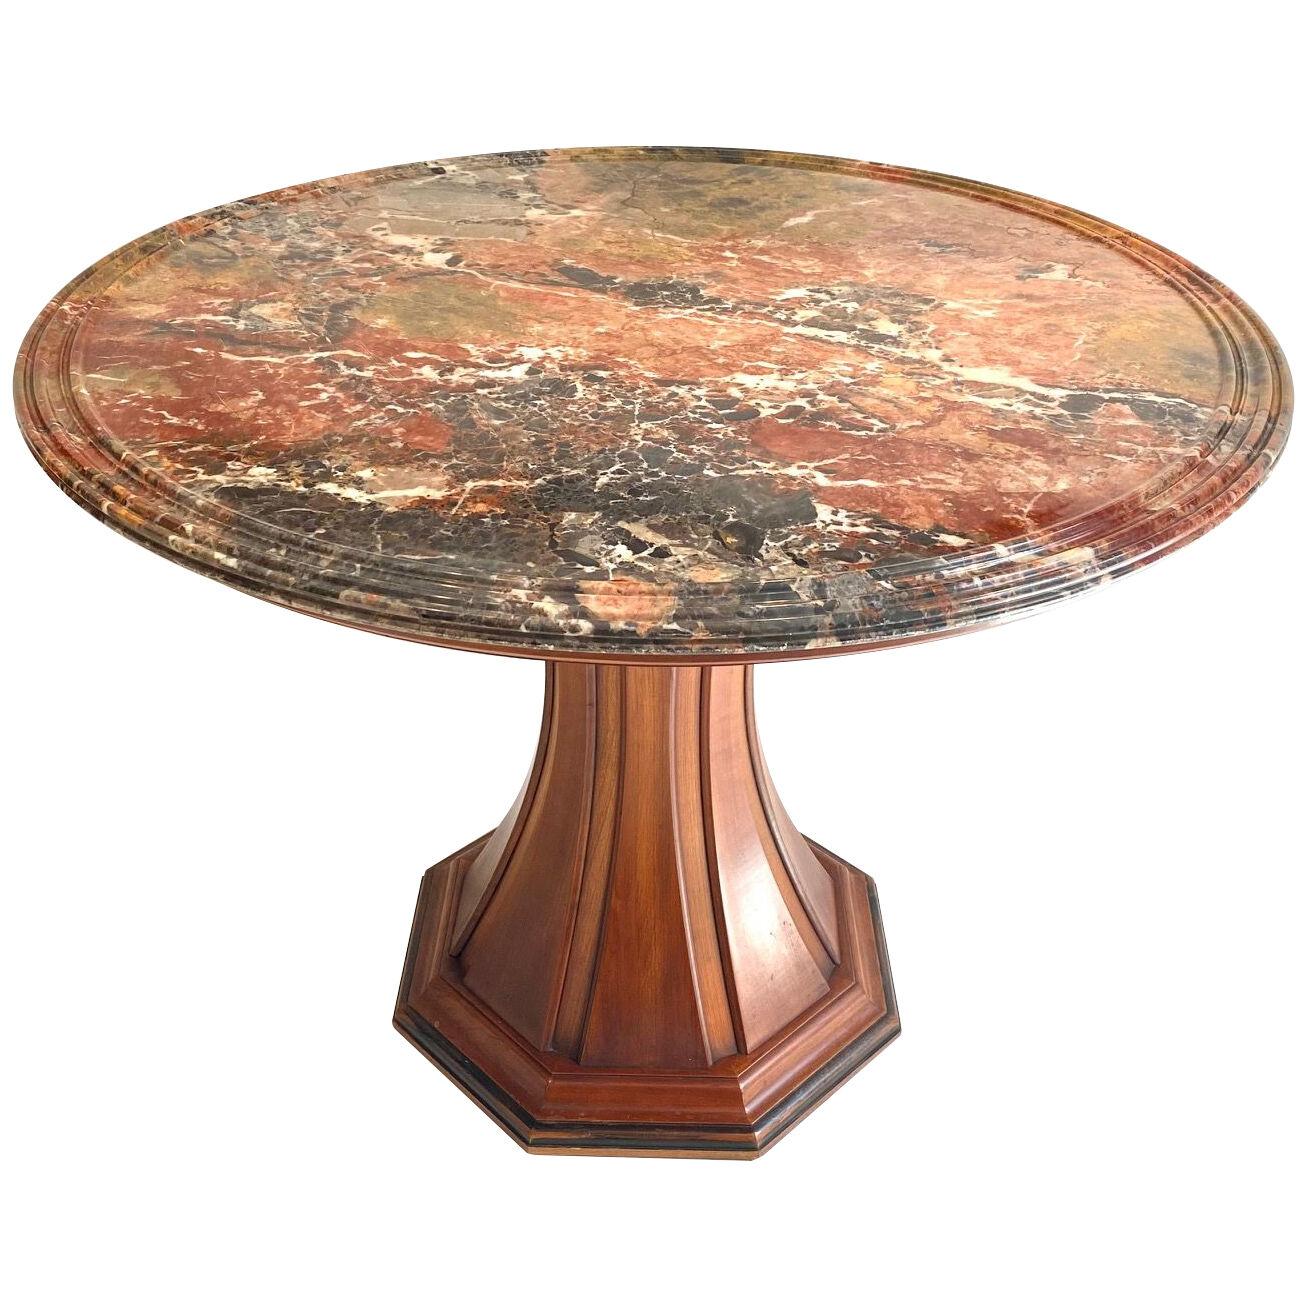 A vintage mahogany centre table with a beautiful 19thC. marble top.